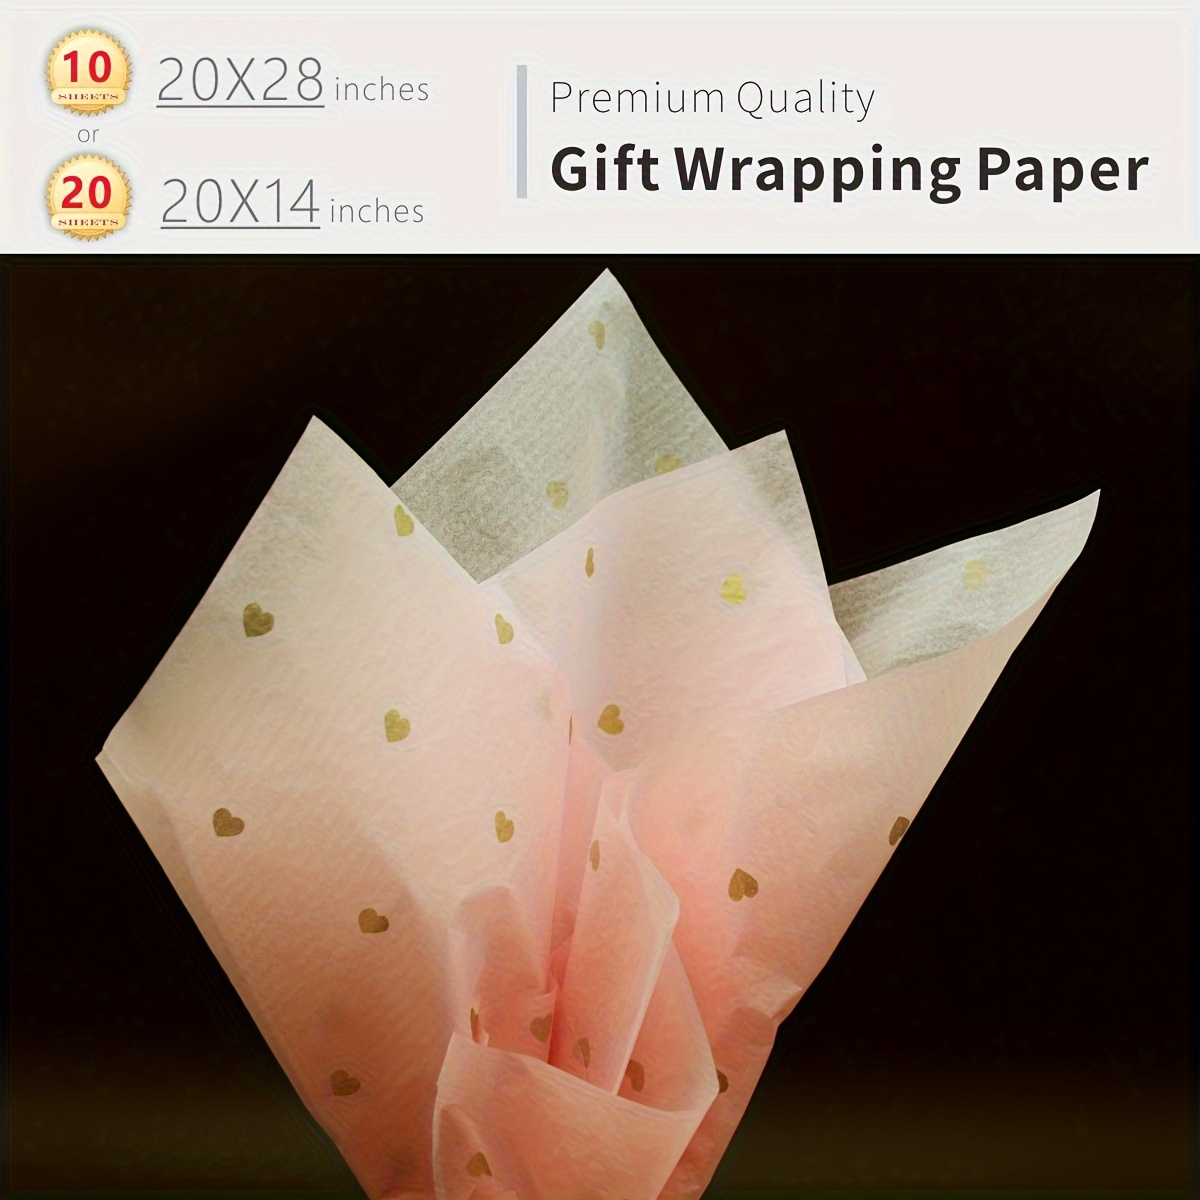 100 Sheets Pink Tissue Paper - Artdly 14 x 20 Inches Recyclable Pink  Wrapping Paper Bulk for Weddings Birthday DIY Project Christmas Gift  Wrapping